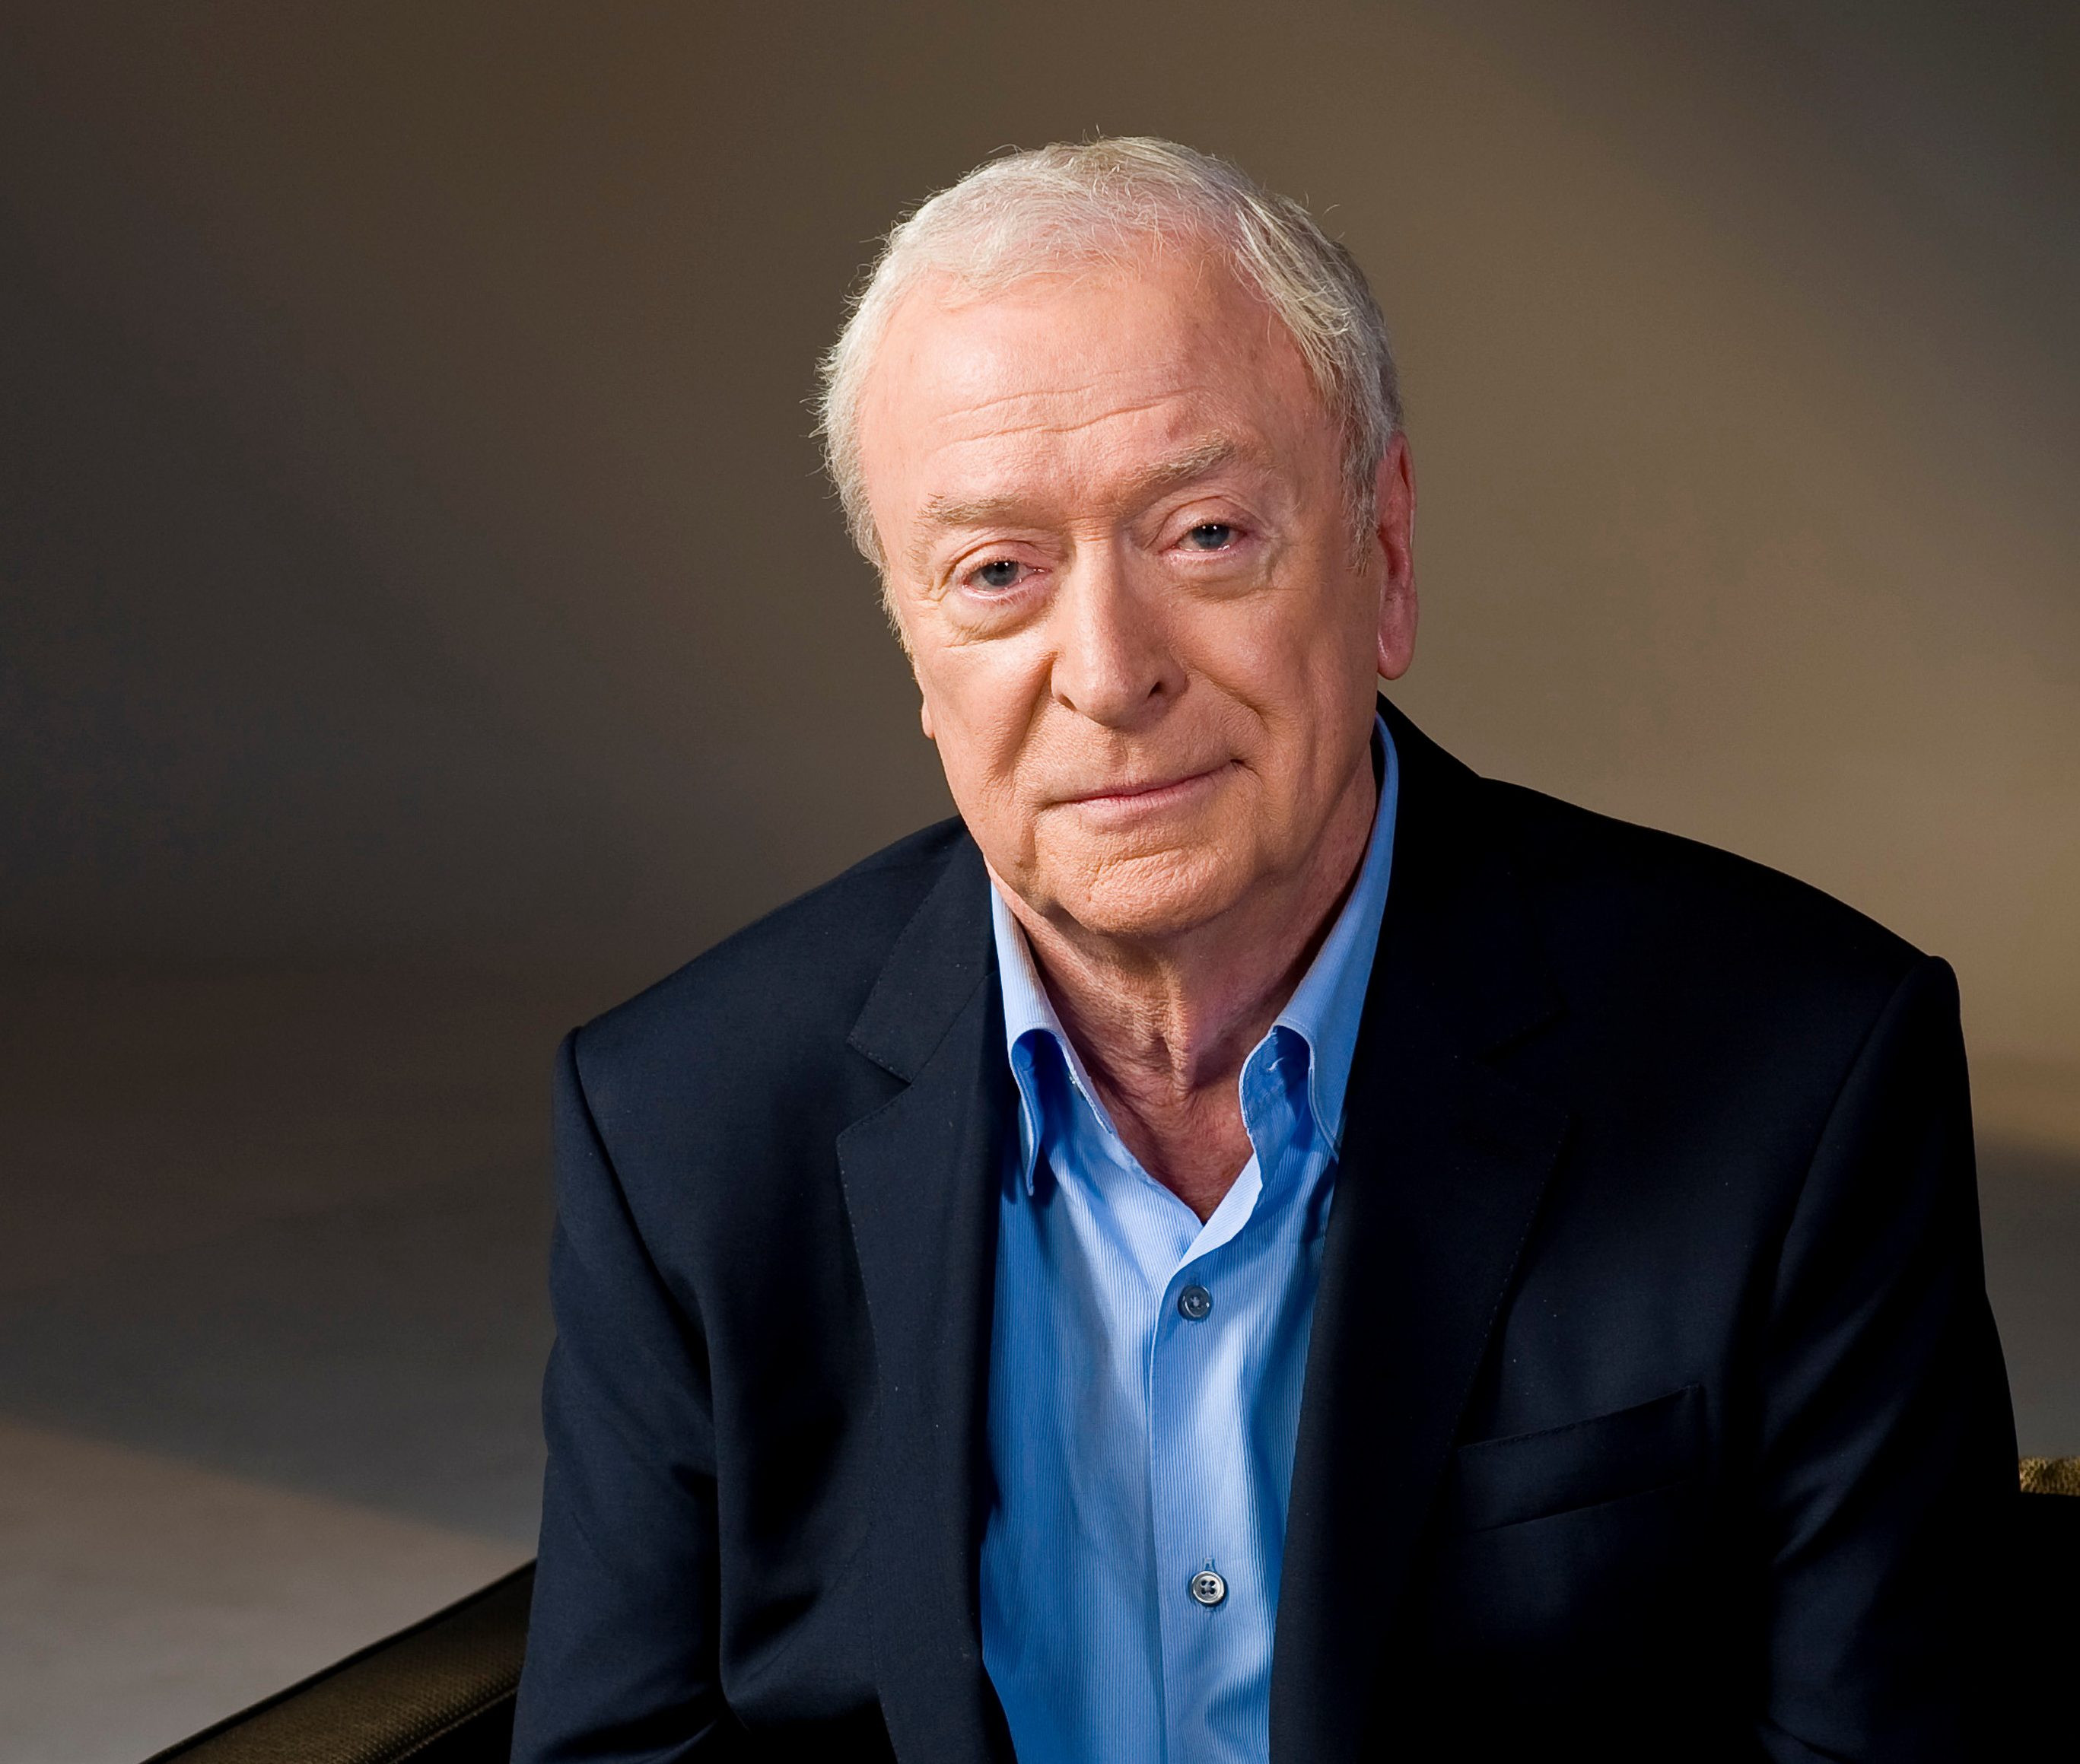 michael-caine-025-michael-caine-c2ae-raymi-hero-productions-2017-photo-by-jeff-spicer-e1564489766704.jpg